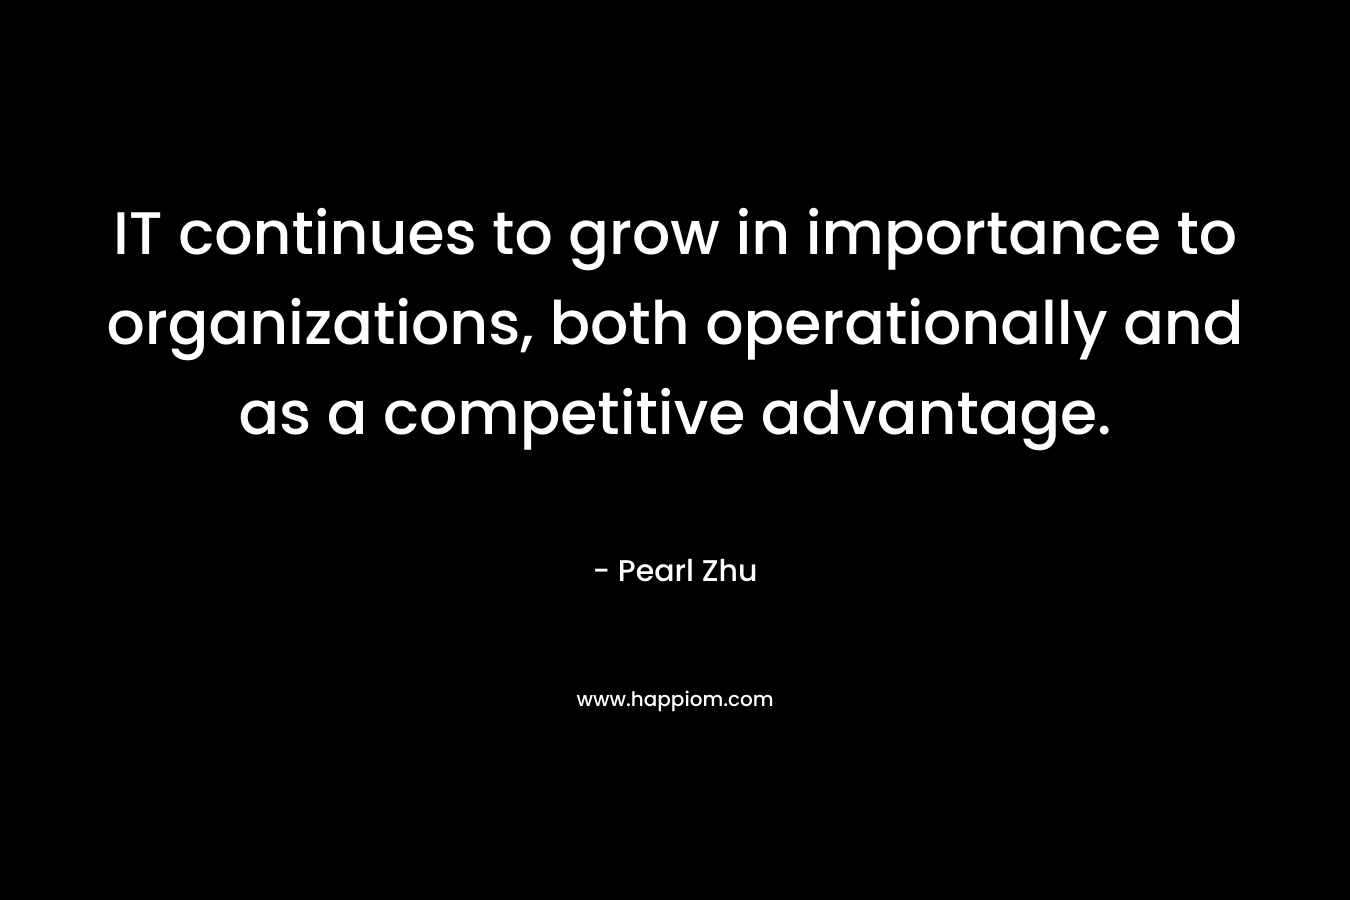 IT continues to grow in importance to organizations, both operationally and as a competitive advantage.